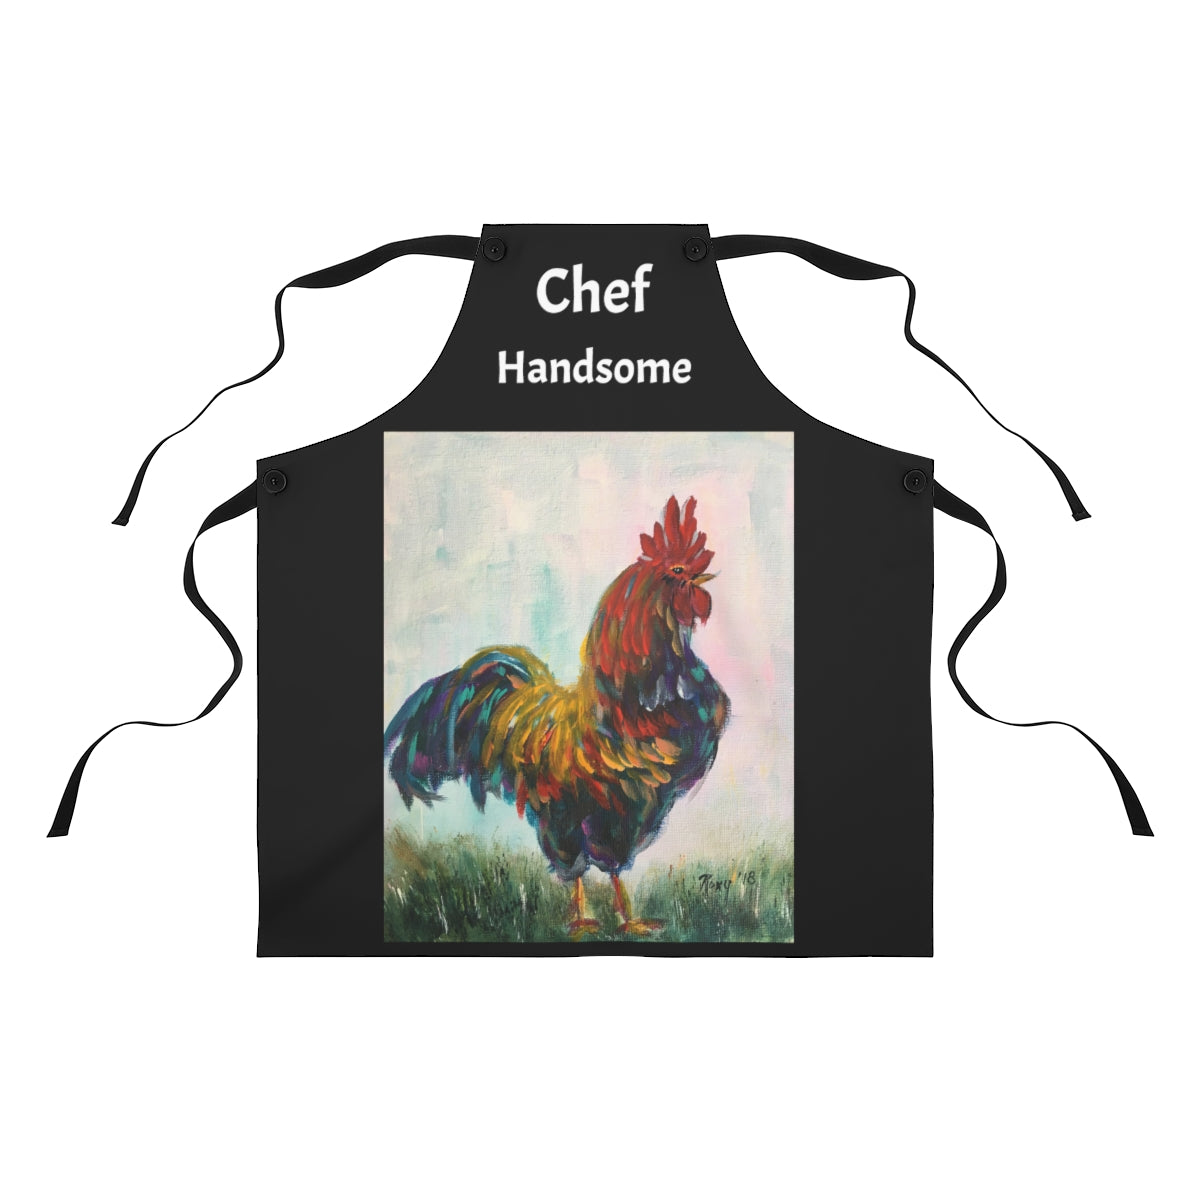 Chef Handsome   Black Kitchen Apron  Rooster Painting